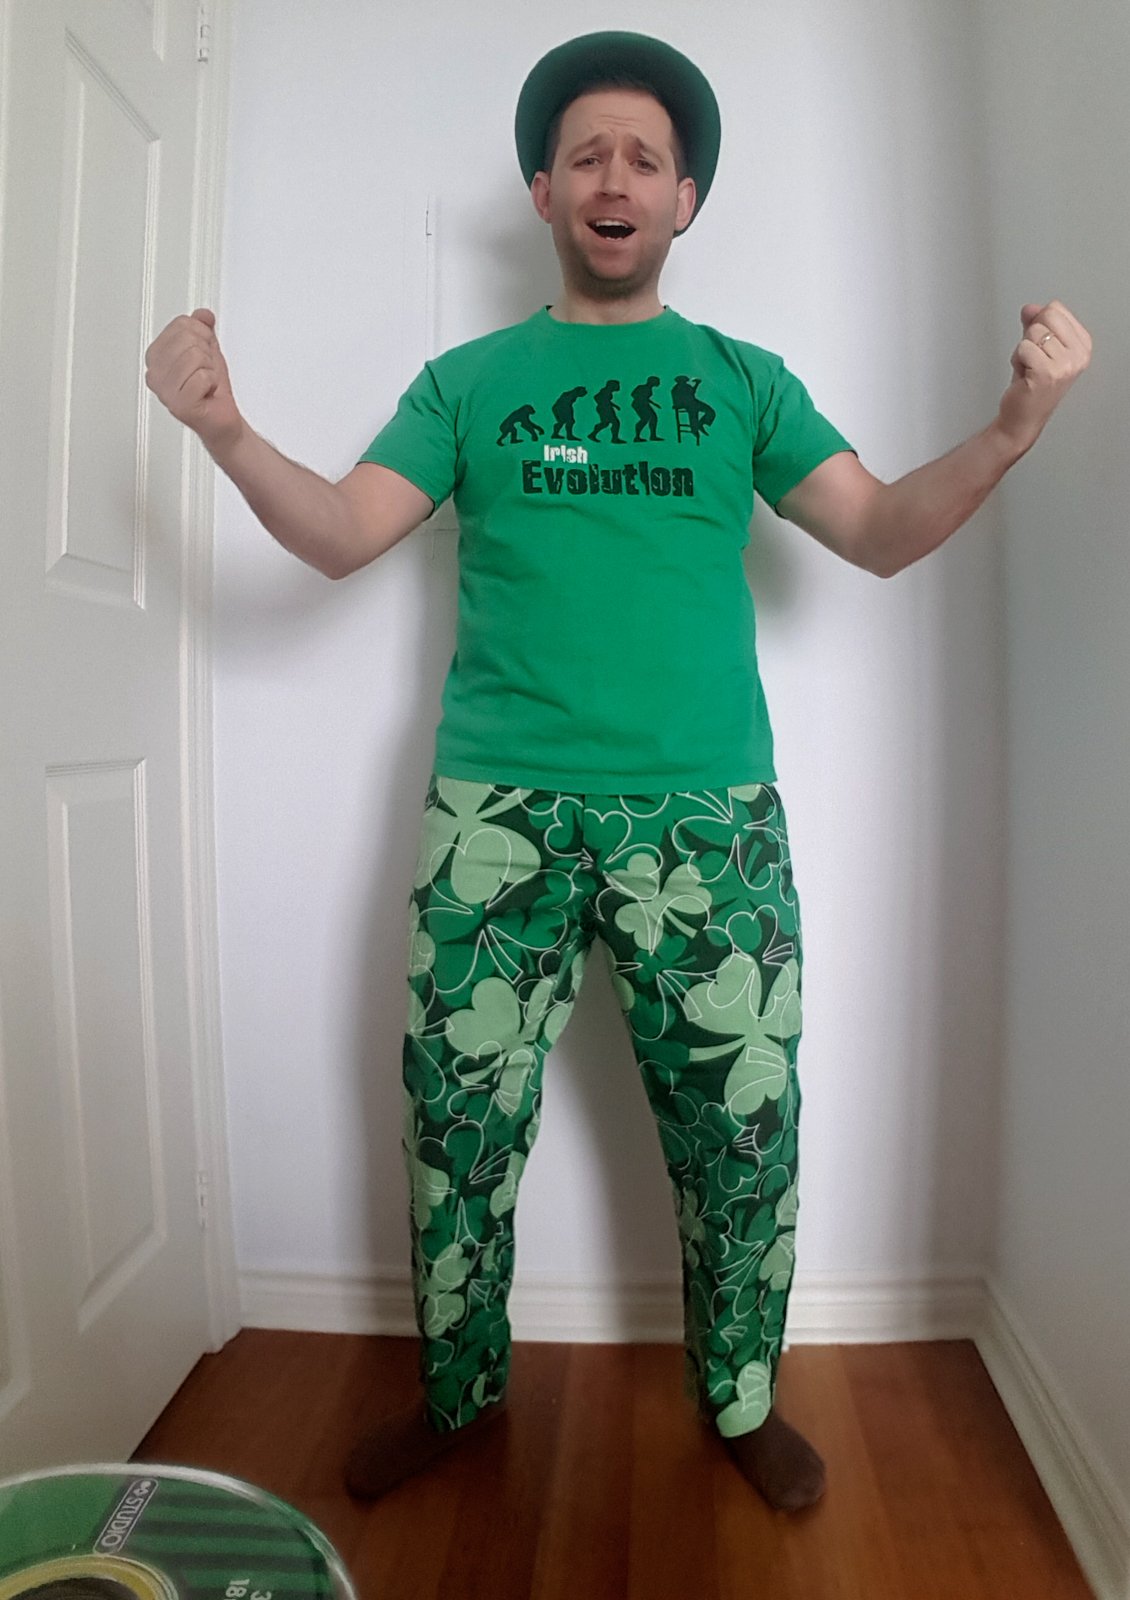 St. Patricks Day outfit for work,March 2018